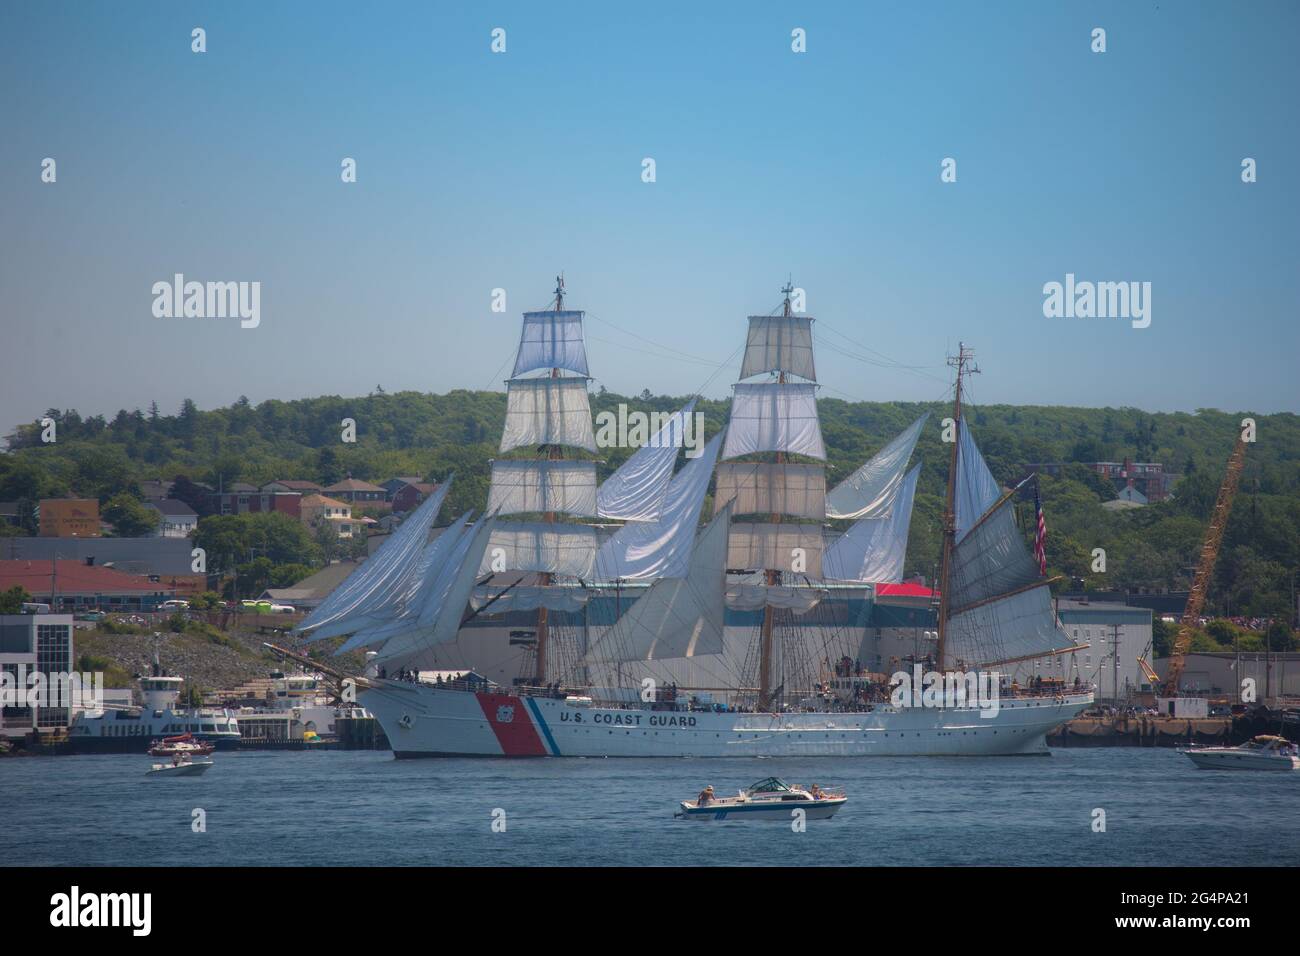 US Coast Guard as Tall ships participating in a parade of sails as part of Rendezvous 2017 in Halifax on Aug. 1, 2017 during the Tall Ships festival Stock Photo